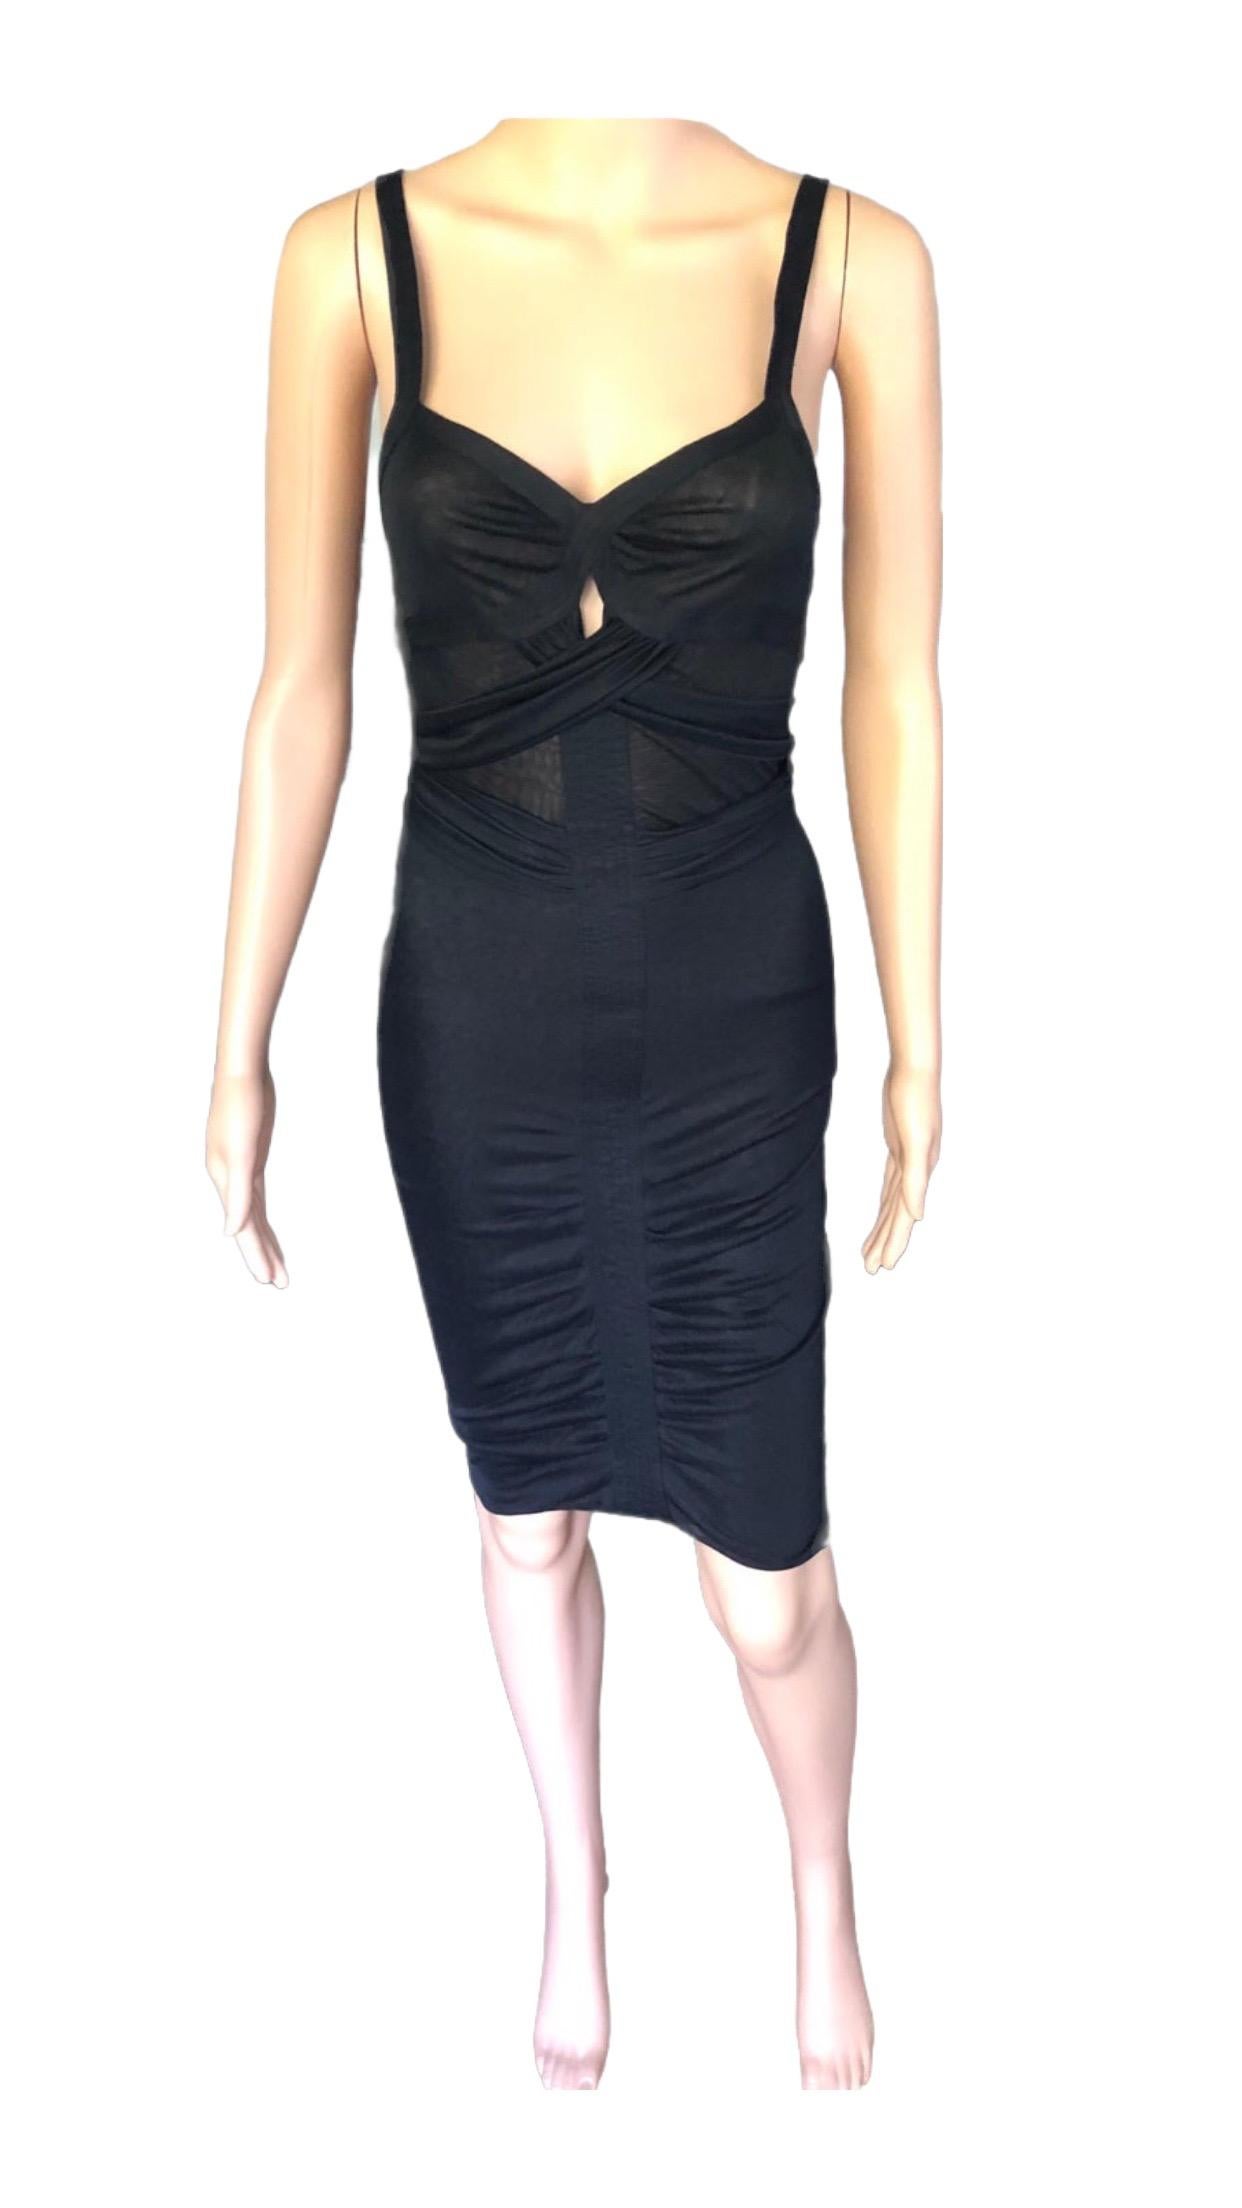 Women's 1990'S Gucci by Tom Ford Semi-Sheer Knit Bodycon Black Dress